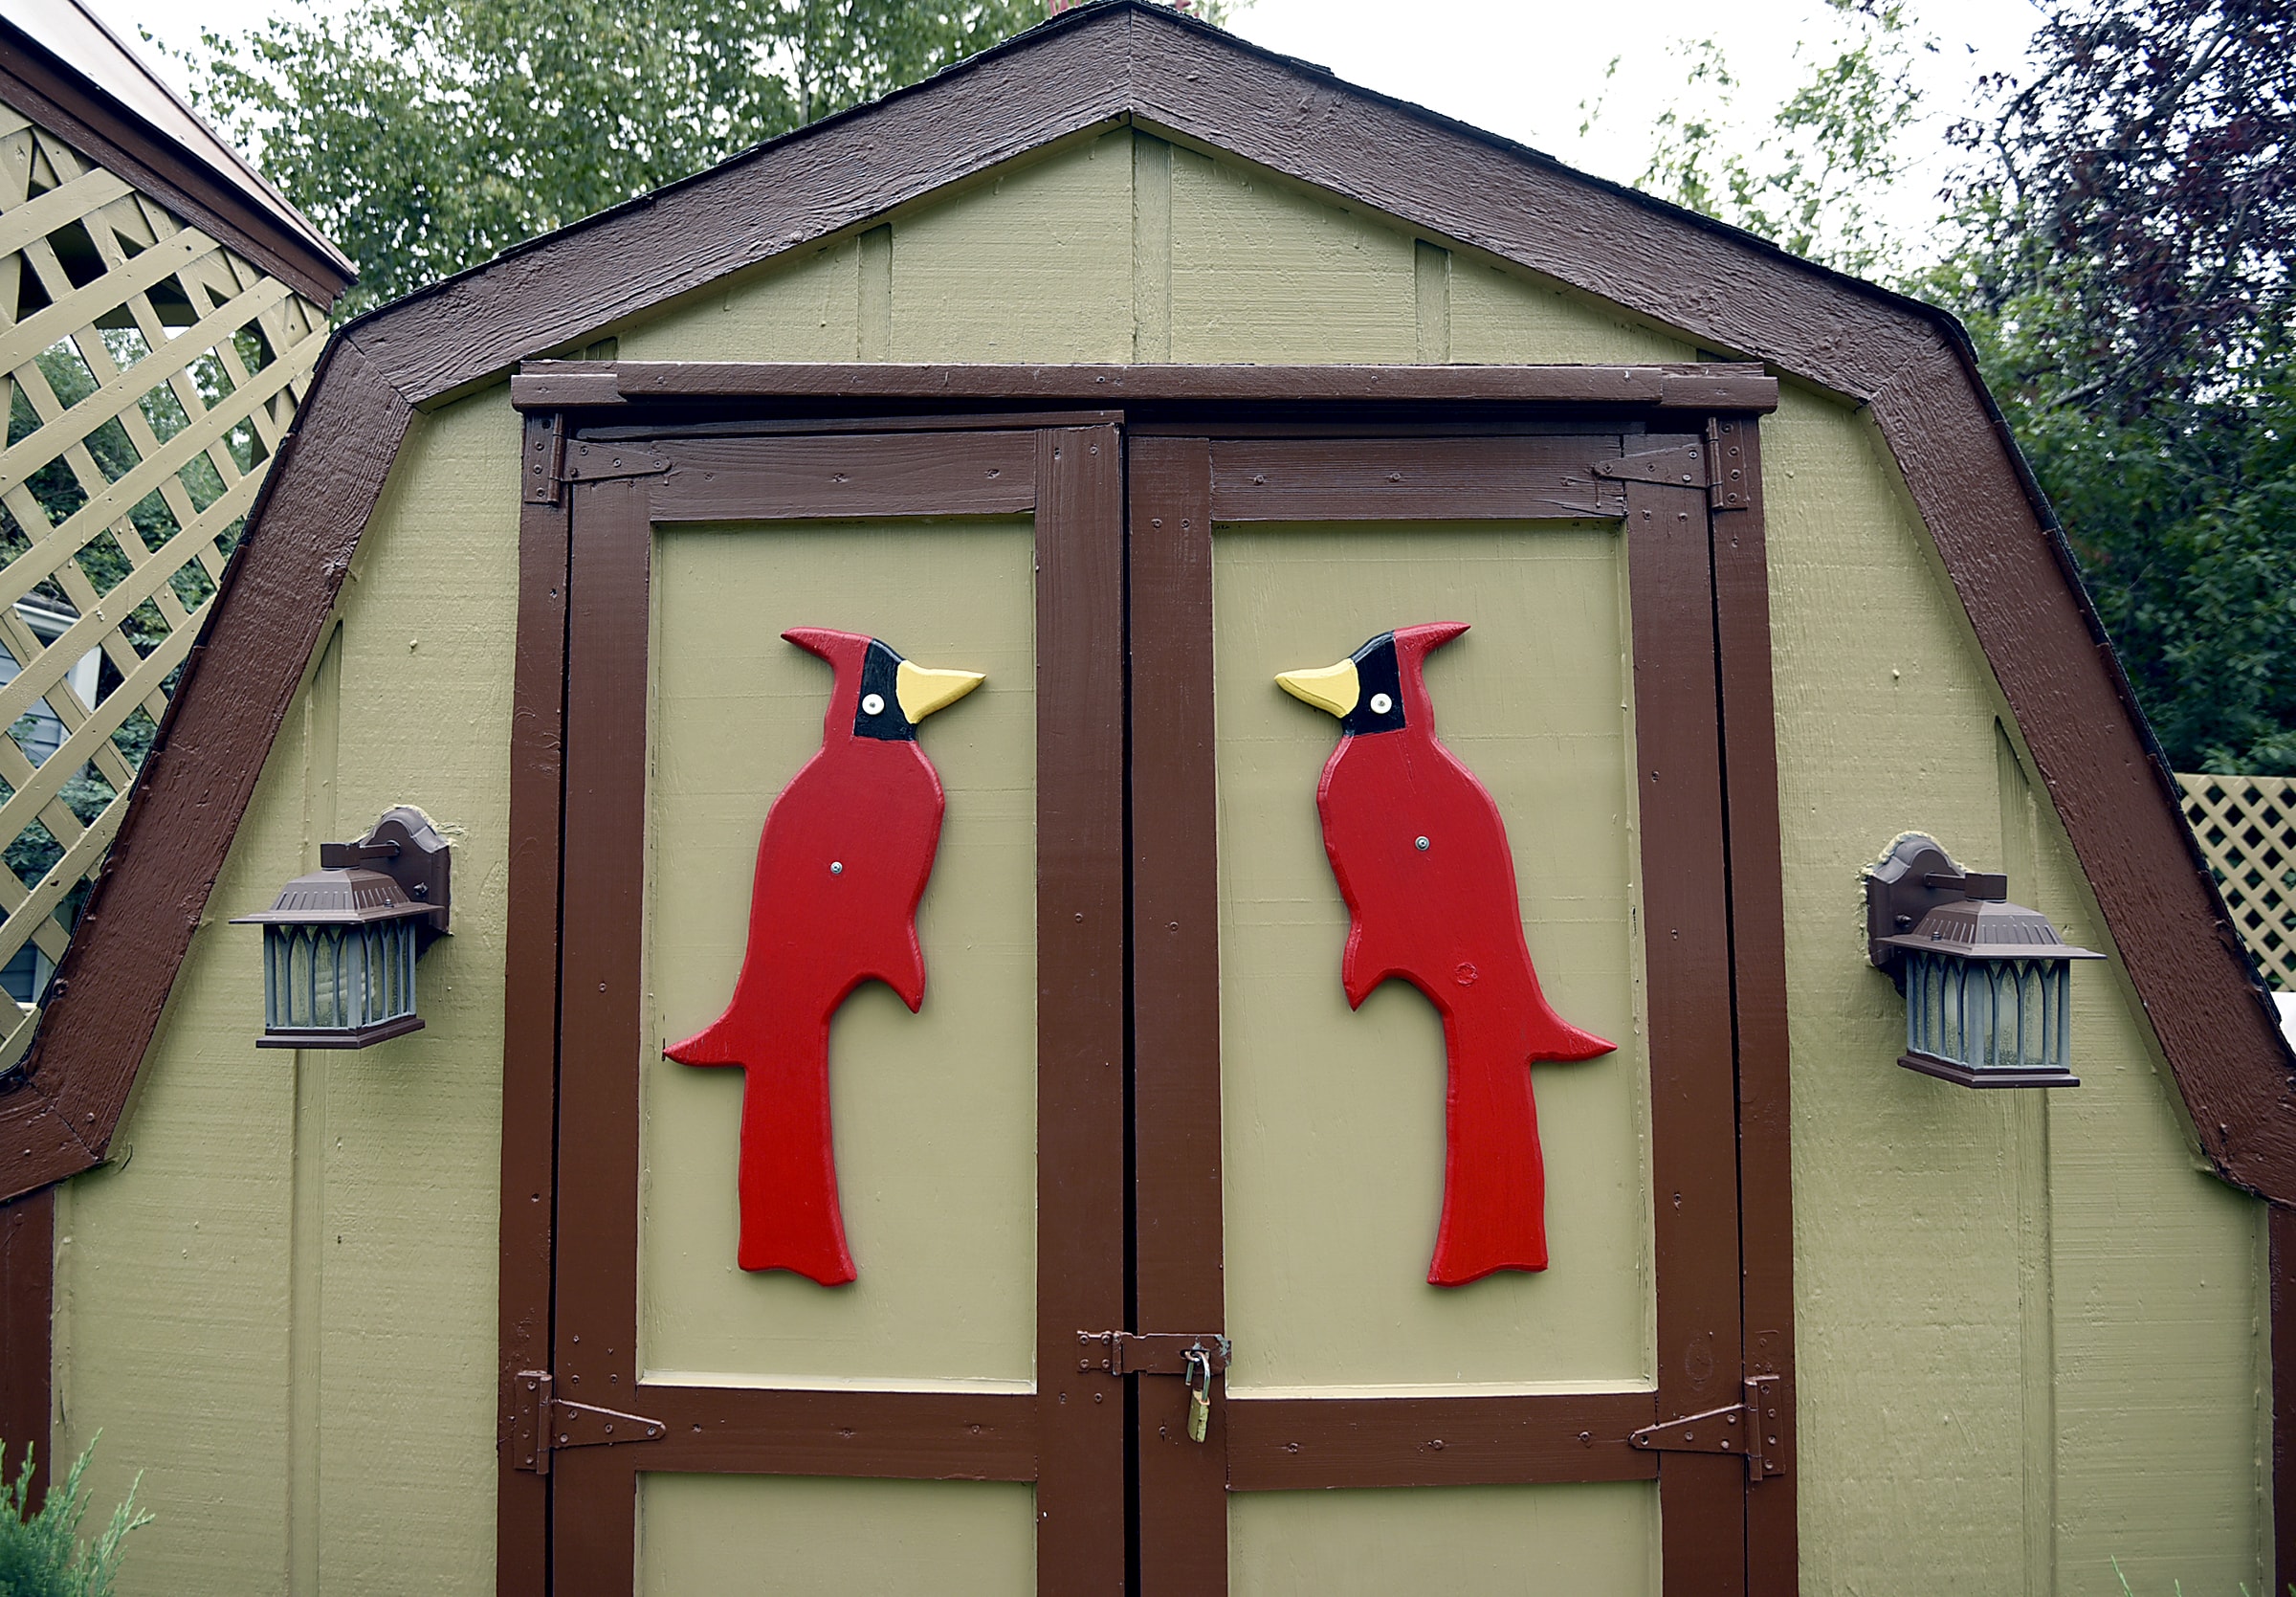 The residents of Rolling Hills Estates, an all-age manufactured home community, take pride in ownership of their homes. This shed has two beautiful red cardinal birds painted on the shed doors.